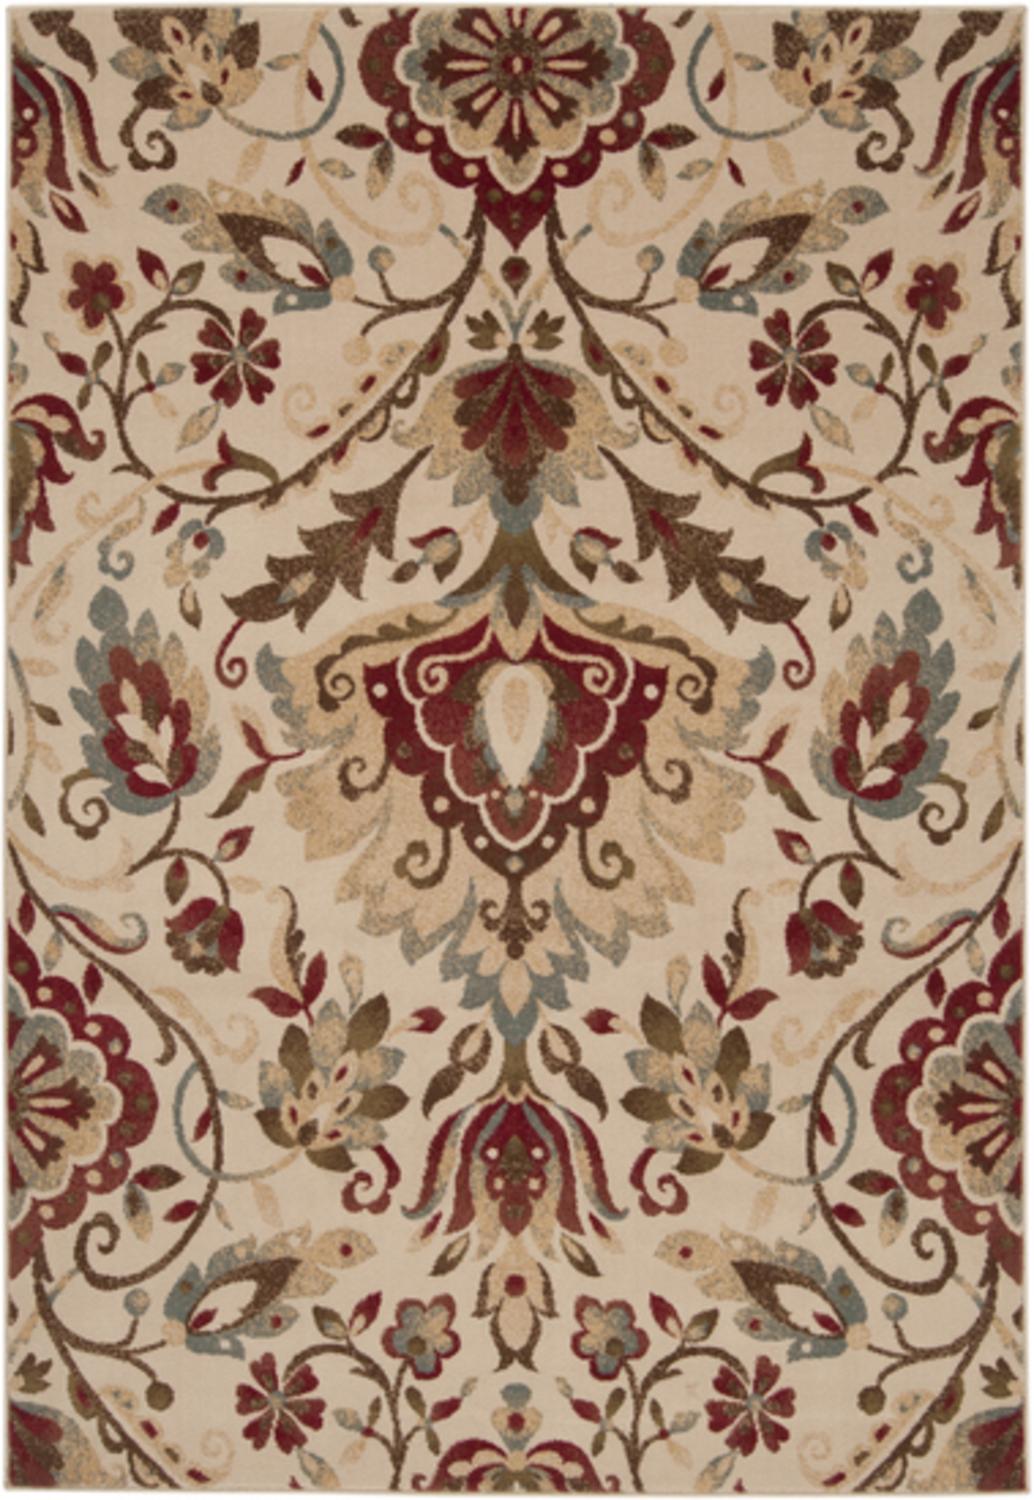 Diva At Home 6.5' x 9.75' Floral Splendor Tan and Olive Shed-Free Rectangular Area Throw Rug